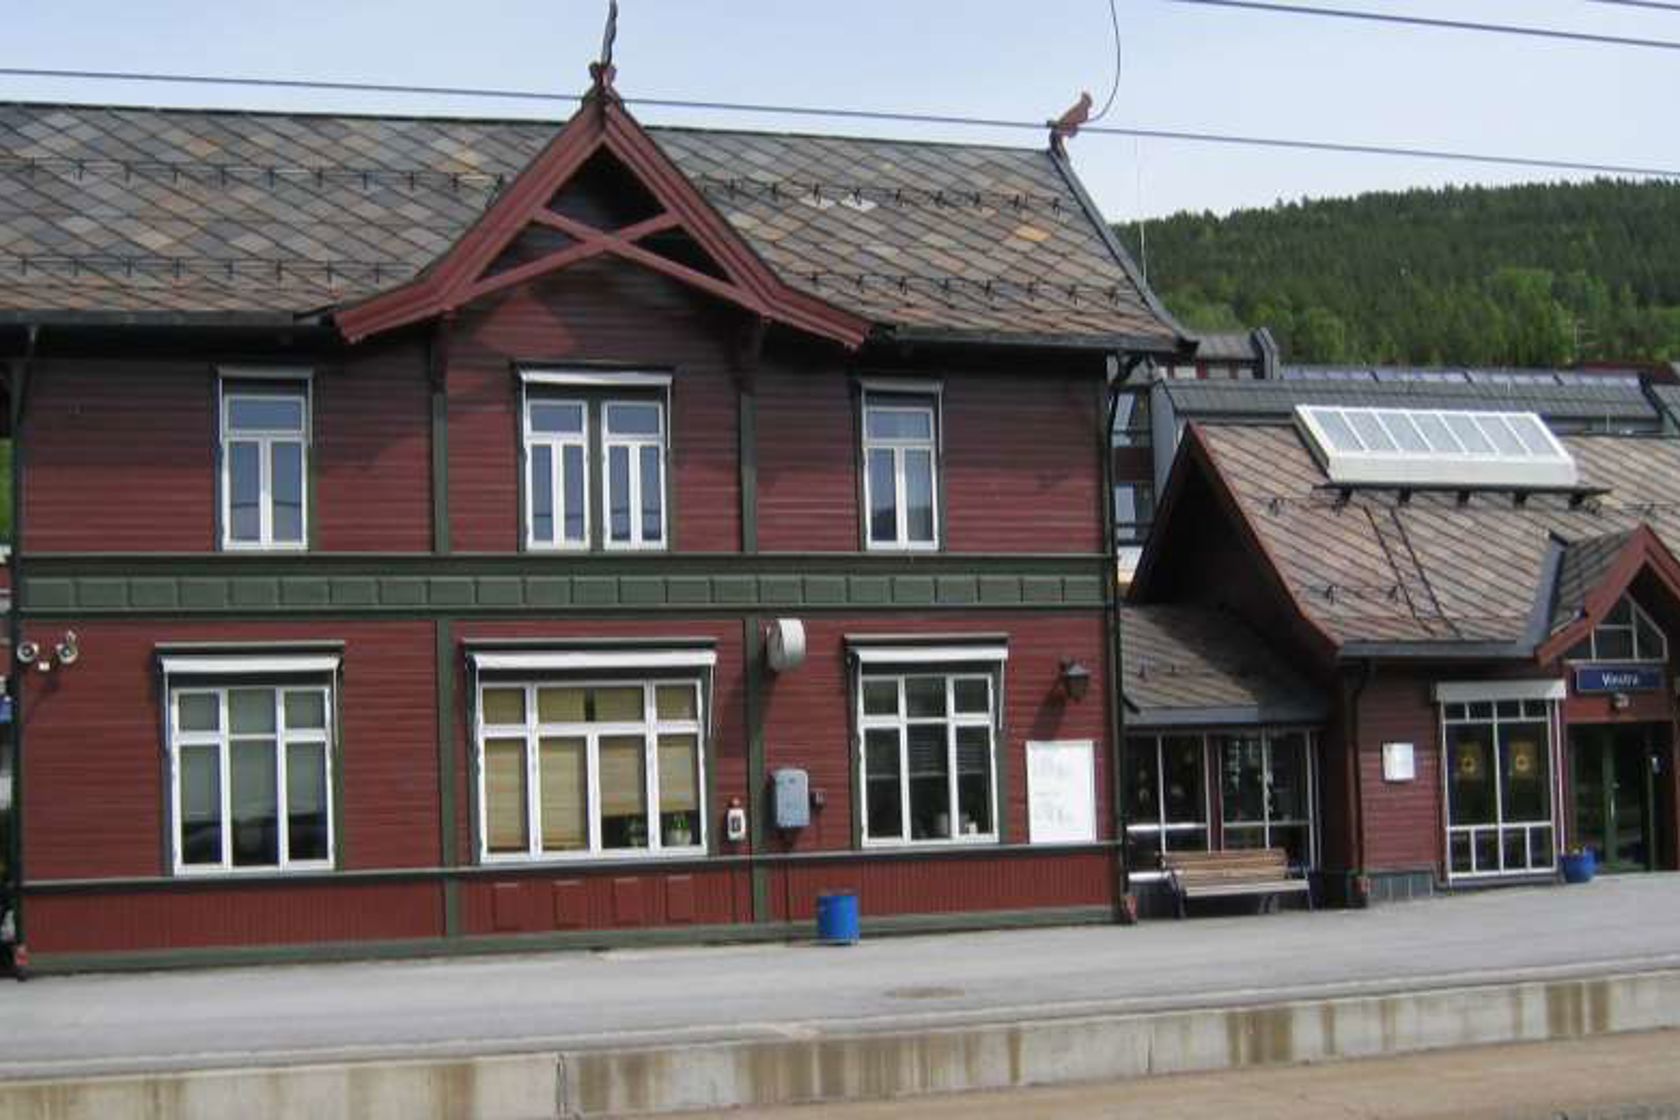 Exterior view of Vinstra station